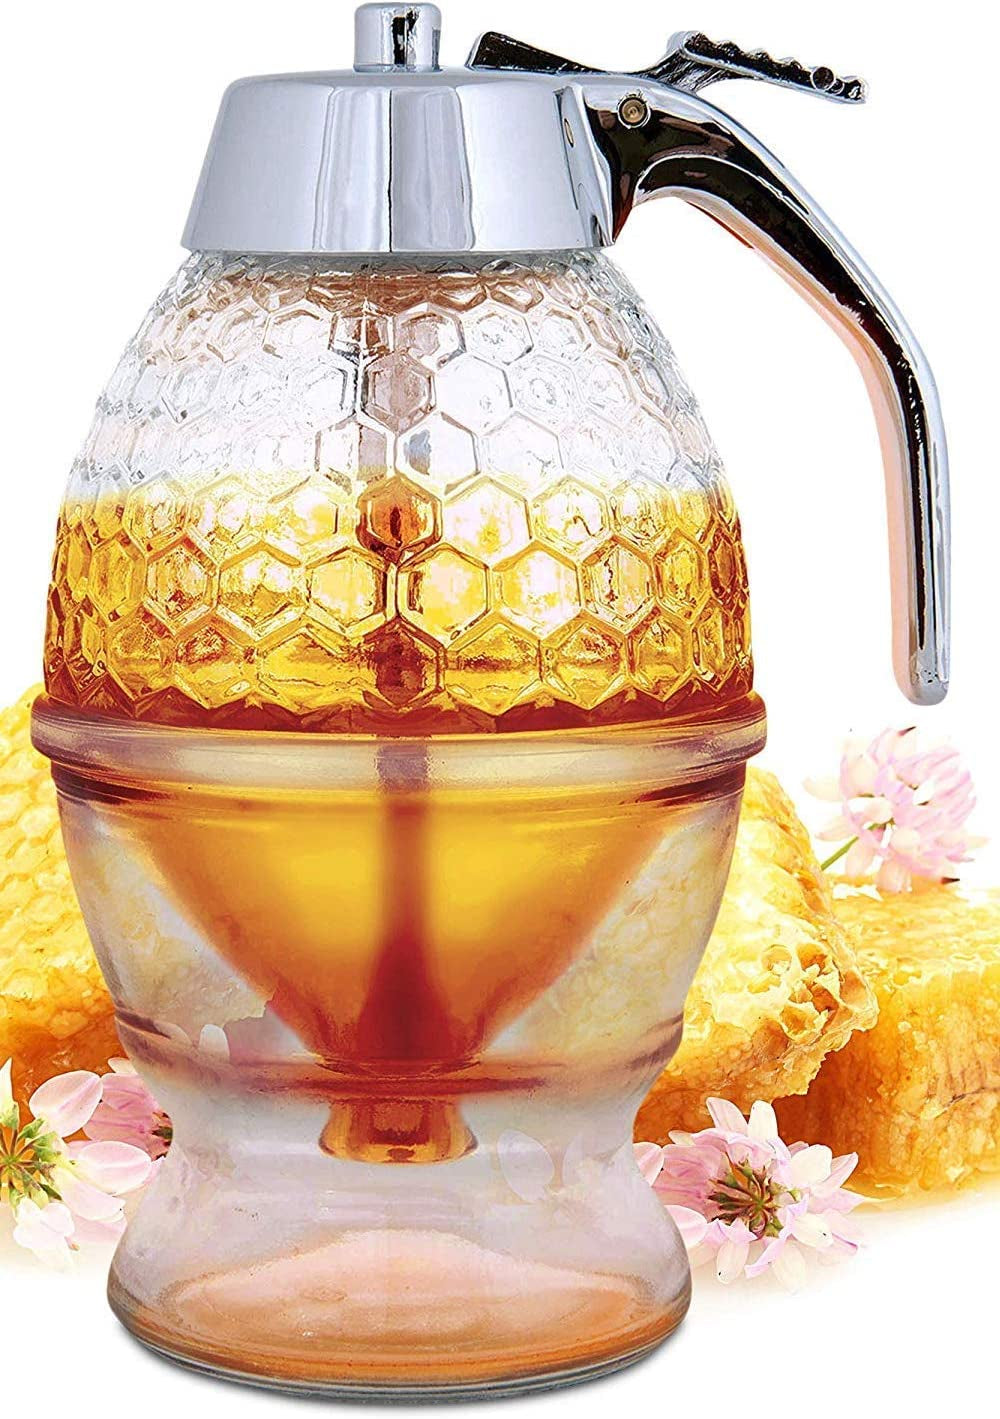 Honey Dispenser No Drip Glass - Honey Container - Maple Glass Syrup Dispenser - Beautiful Honey Comb Shaped Honey Pot - Glass Honey Jar with Stand - Great Bee Decor - Honey Containers